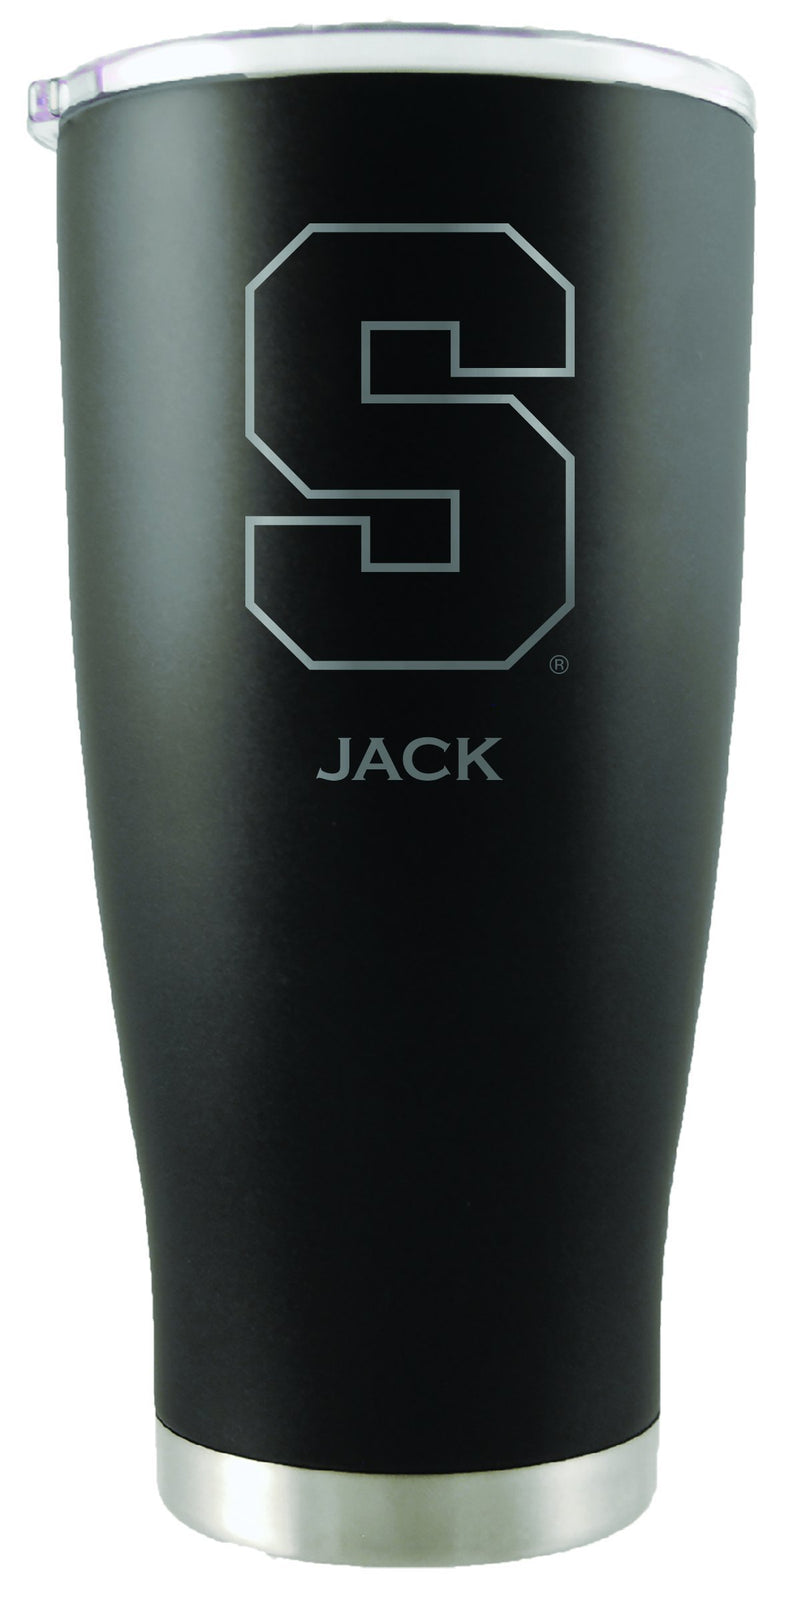 20oz Black Personalized Stainless Steel Tumbler | Syracuse Orange
COL, CurrentProduct, Drinkware_category_All, Personalized_Personalized, SYR, Syracuse Orange
The Memory Company